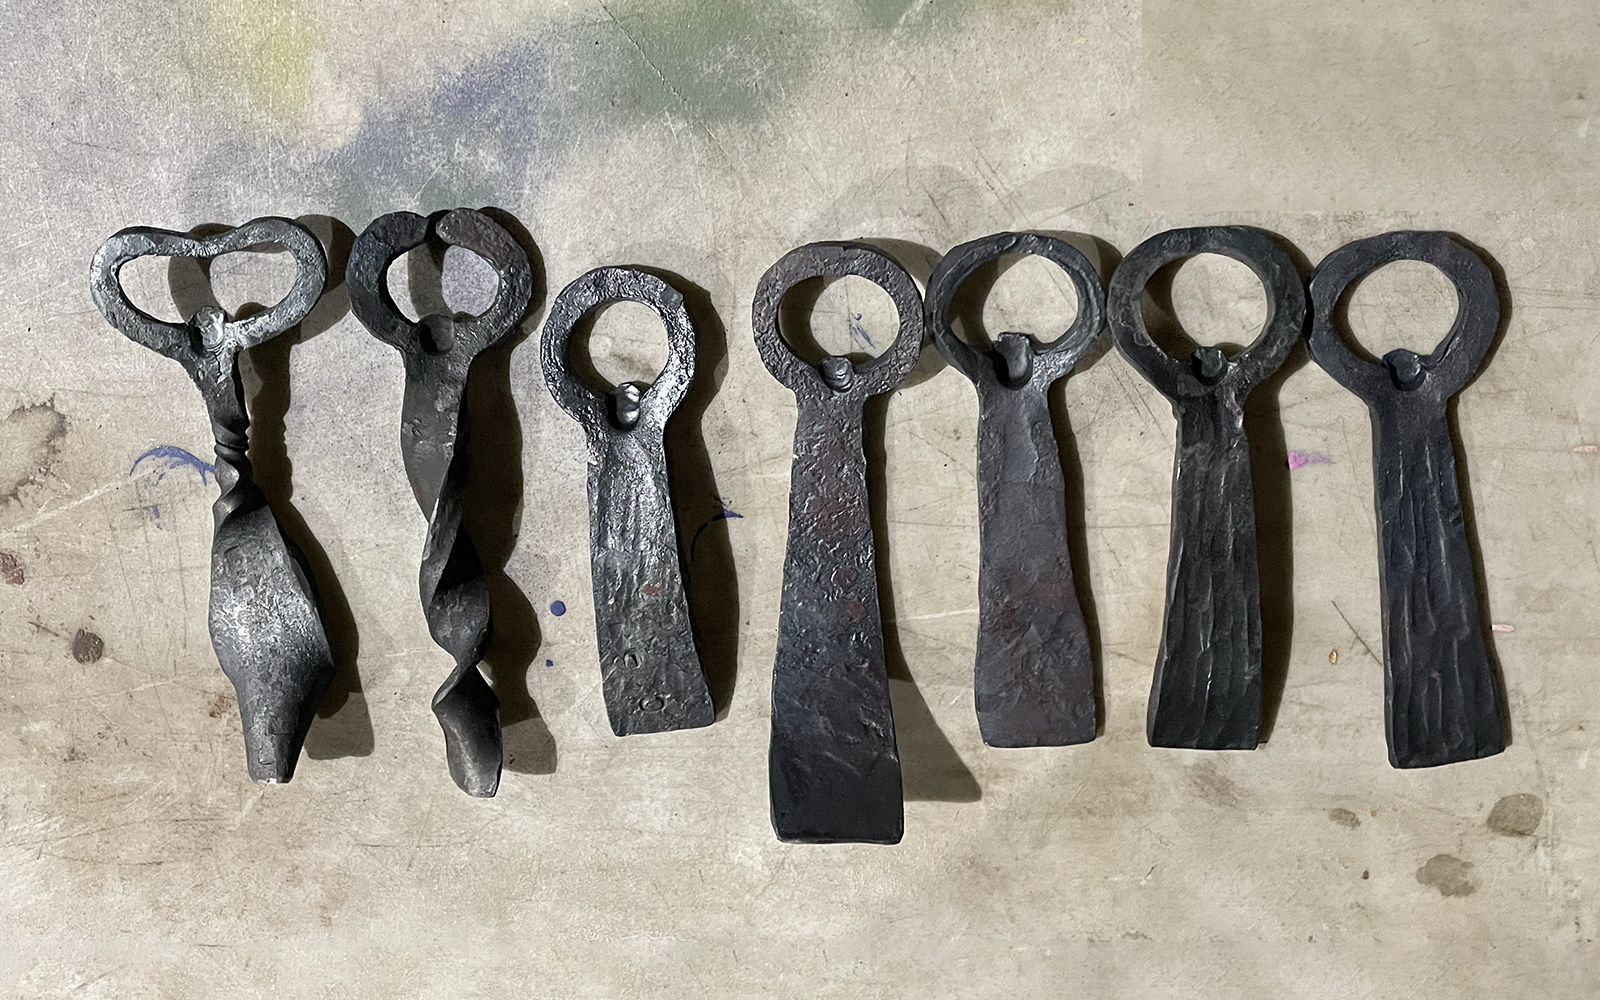 sample bottle openers completed during the workshop